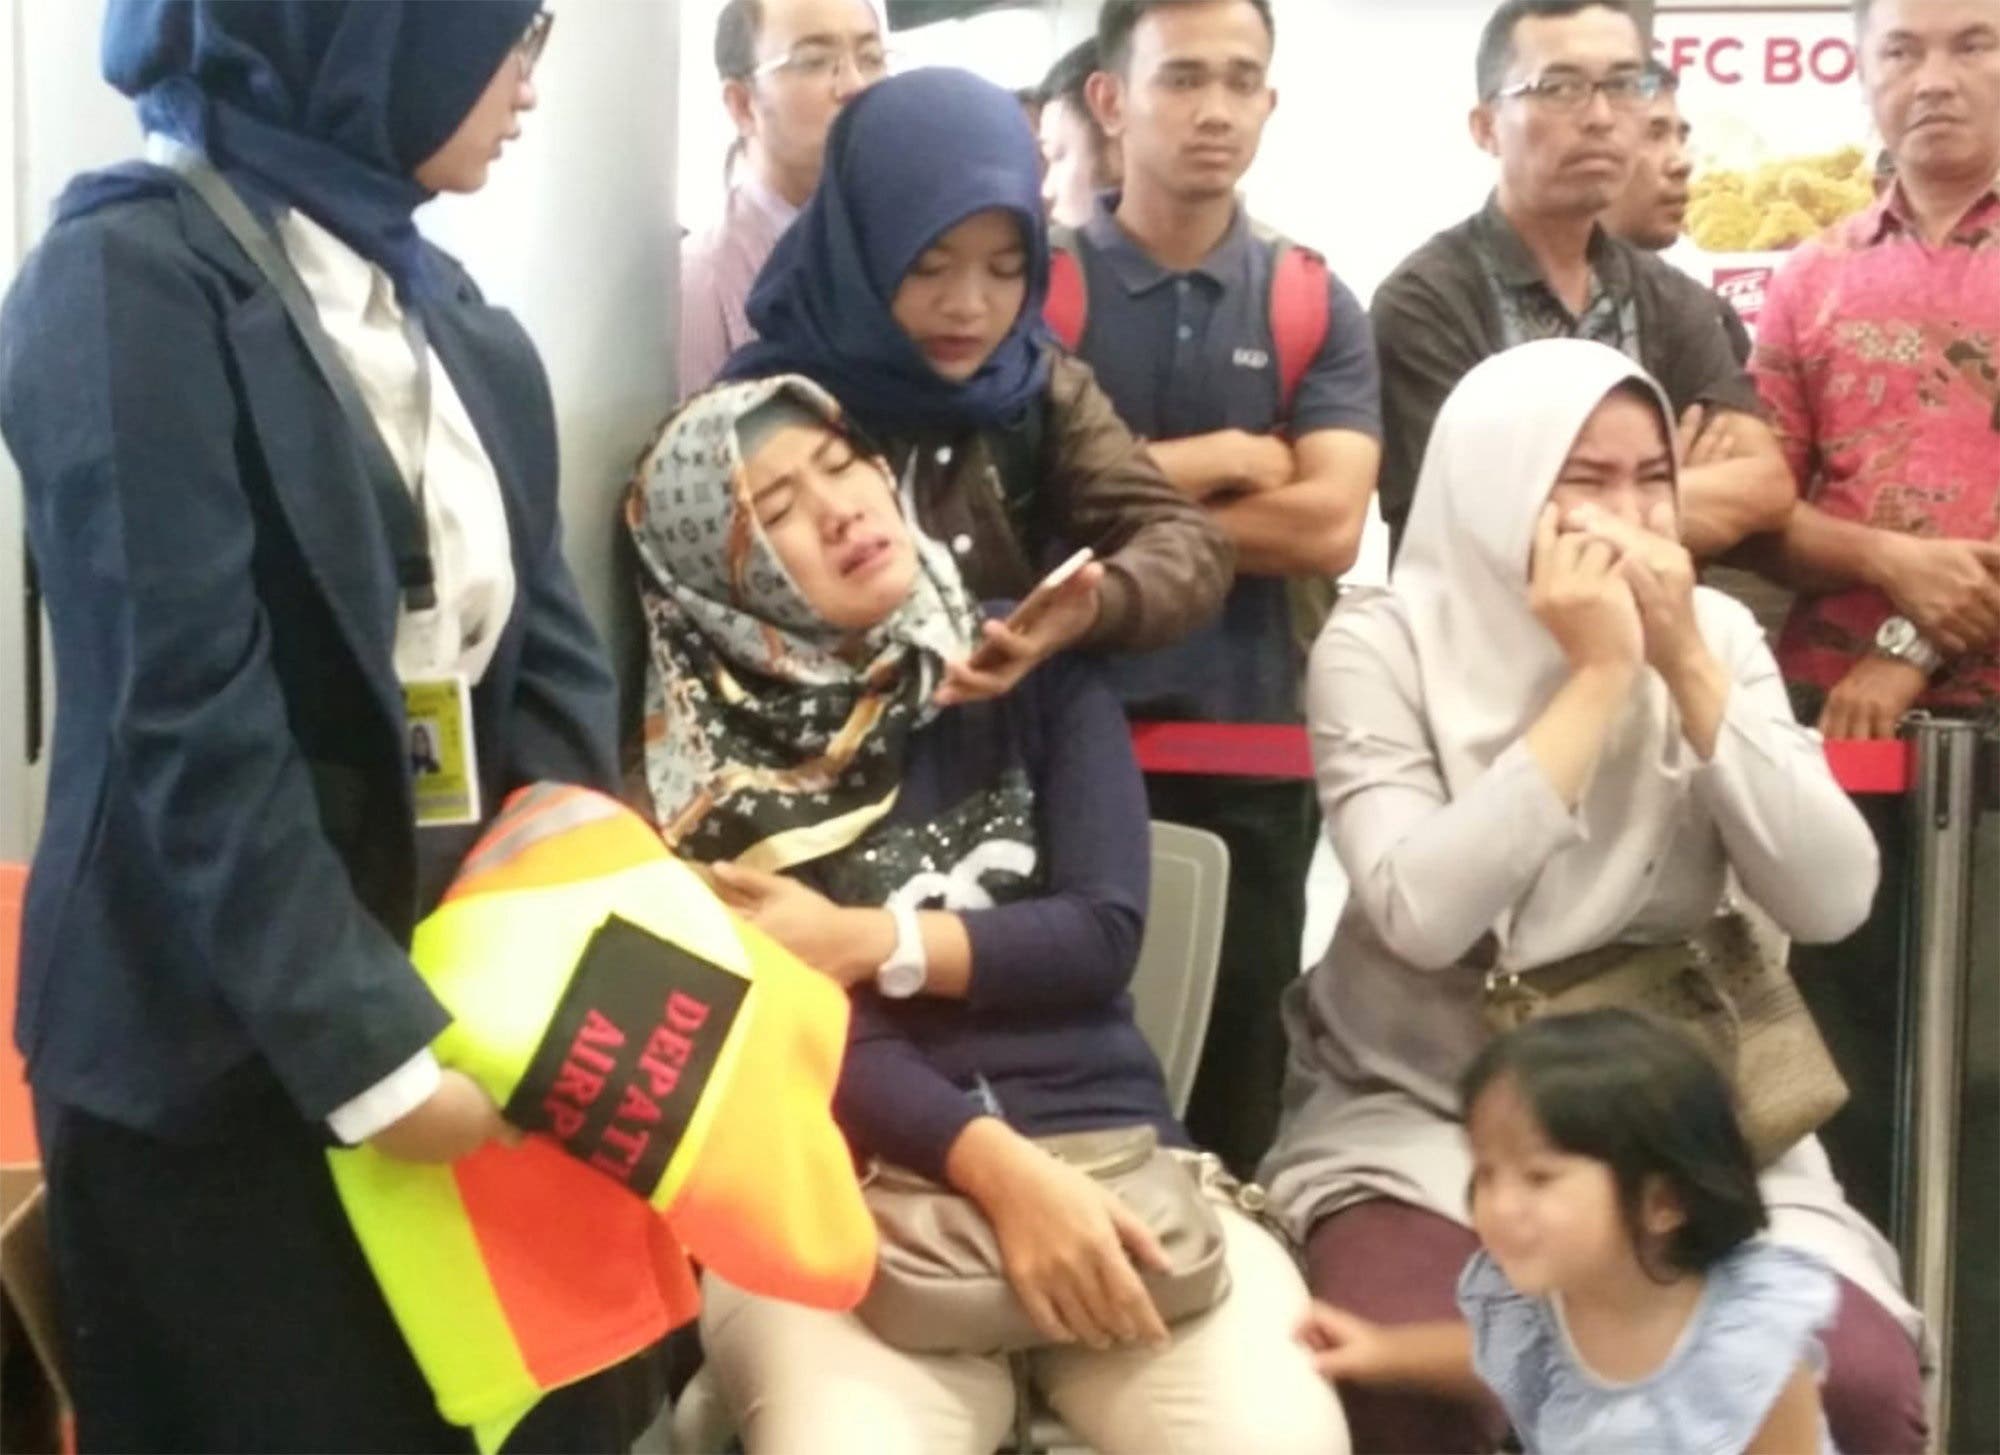 Relatives of passengers of Lion Air flight JT610 that crashed into the sea, cry at Depati Amir airport in Pangkal Pinang. (Reuters)